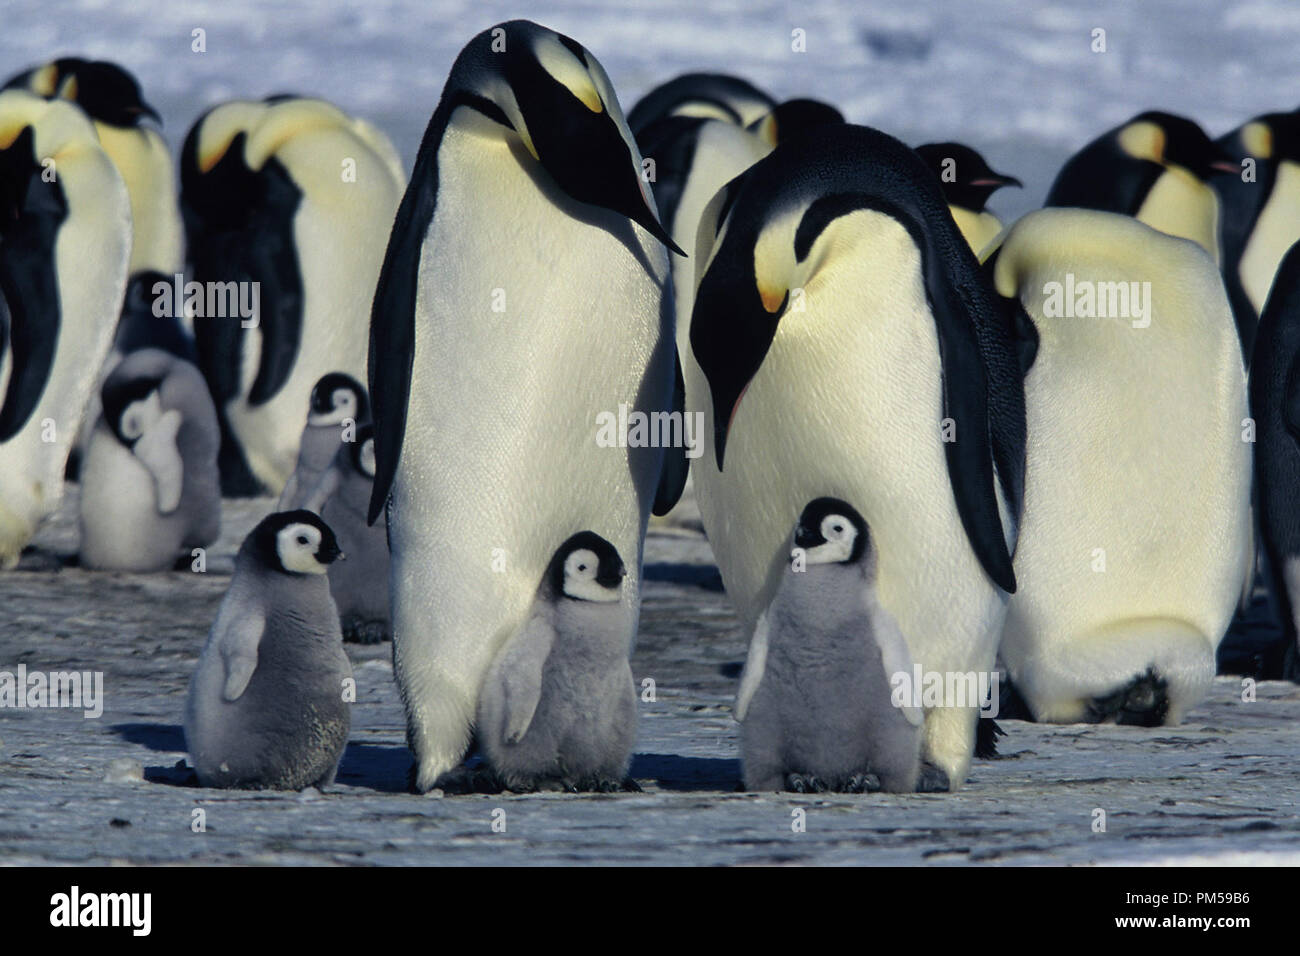 Film Still / Publicity Still from 'March of the Penguins' 2005 © 2005 National Geographic  File Reference # 30736226THA  For Editorial Use Only -  All Rights Reserved Stock Photo